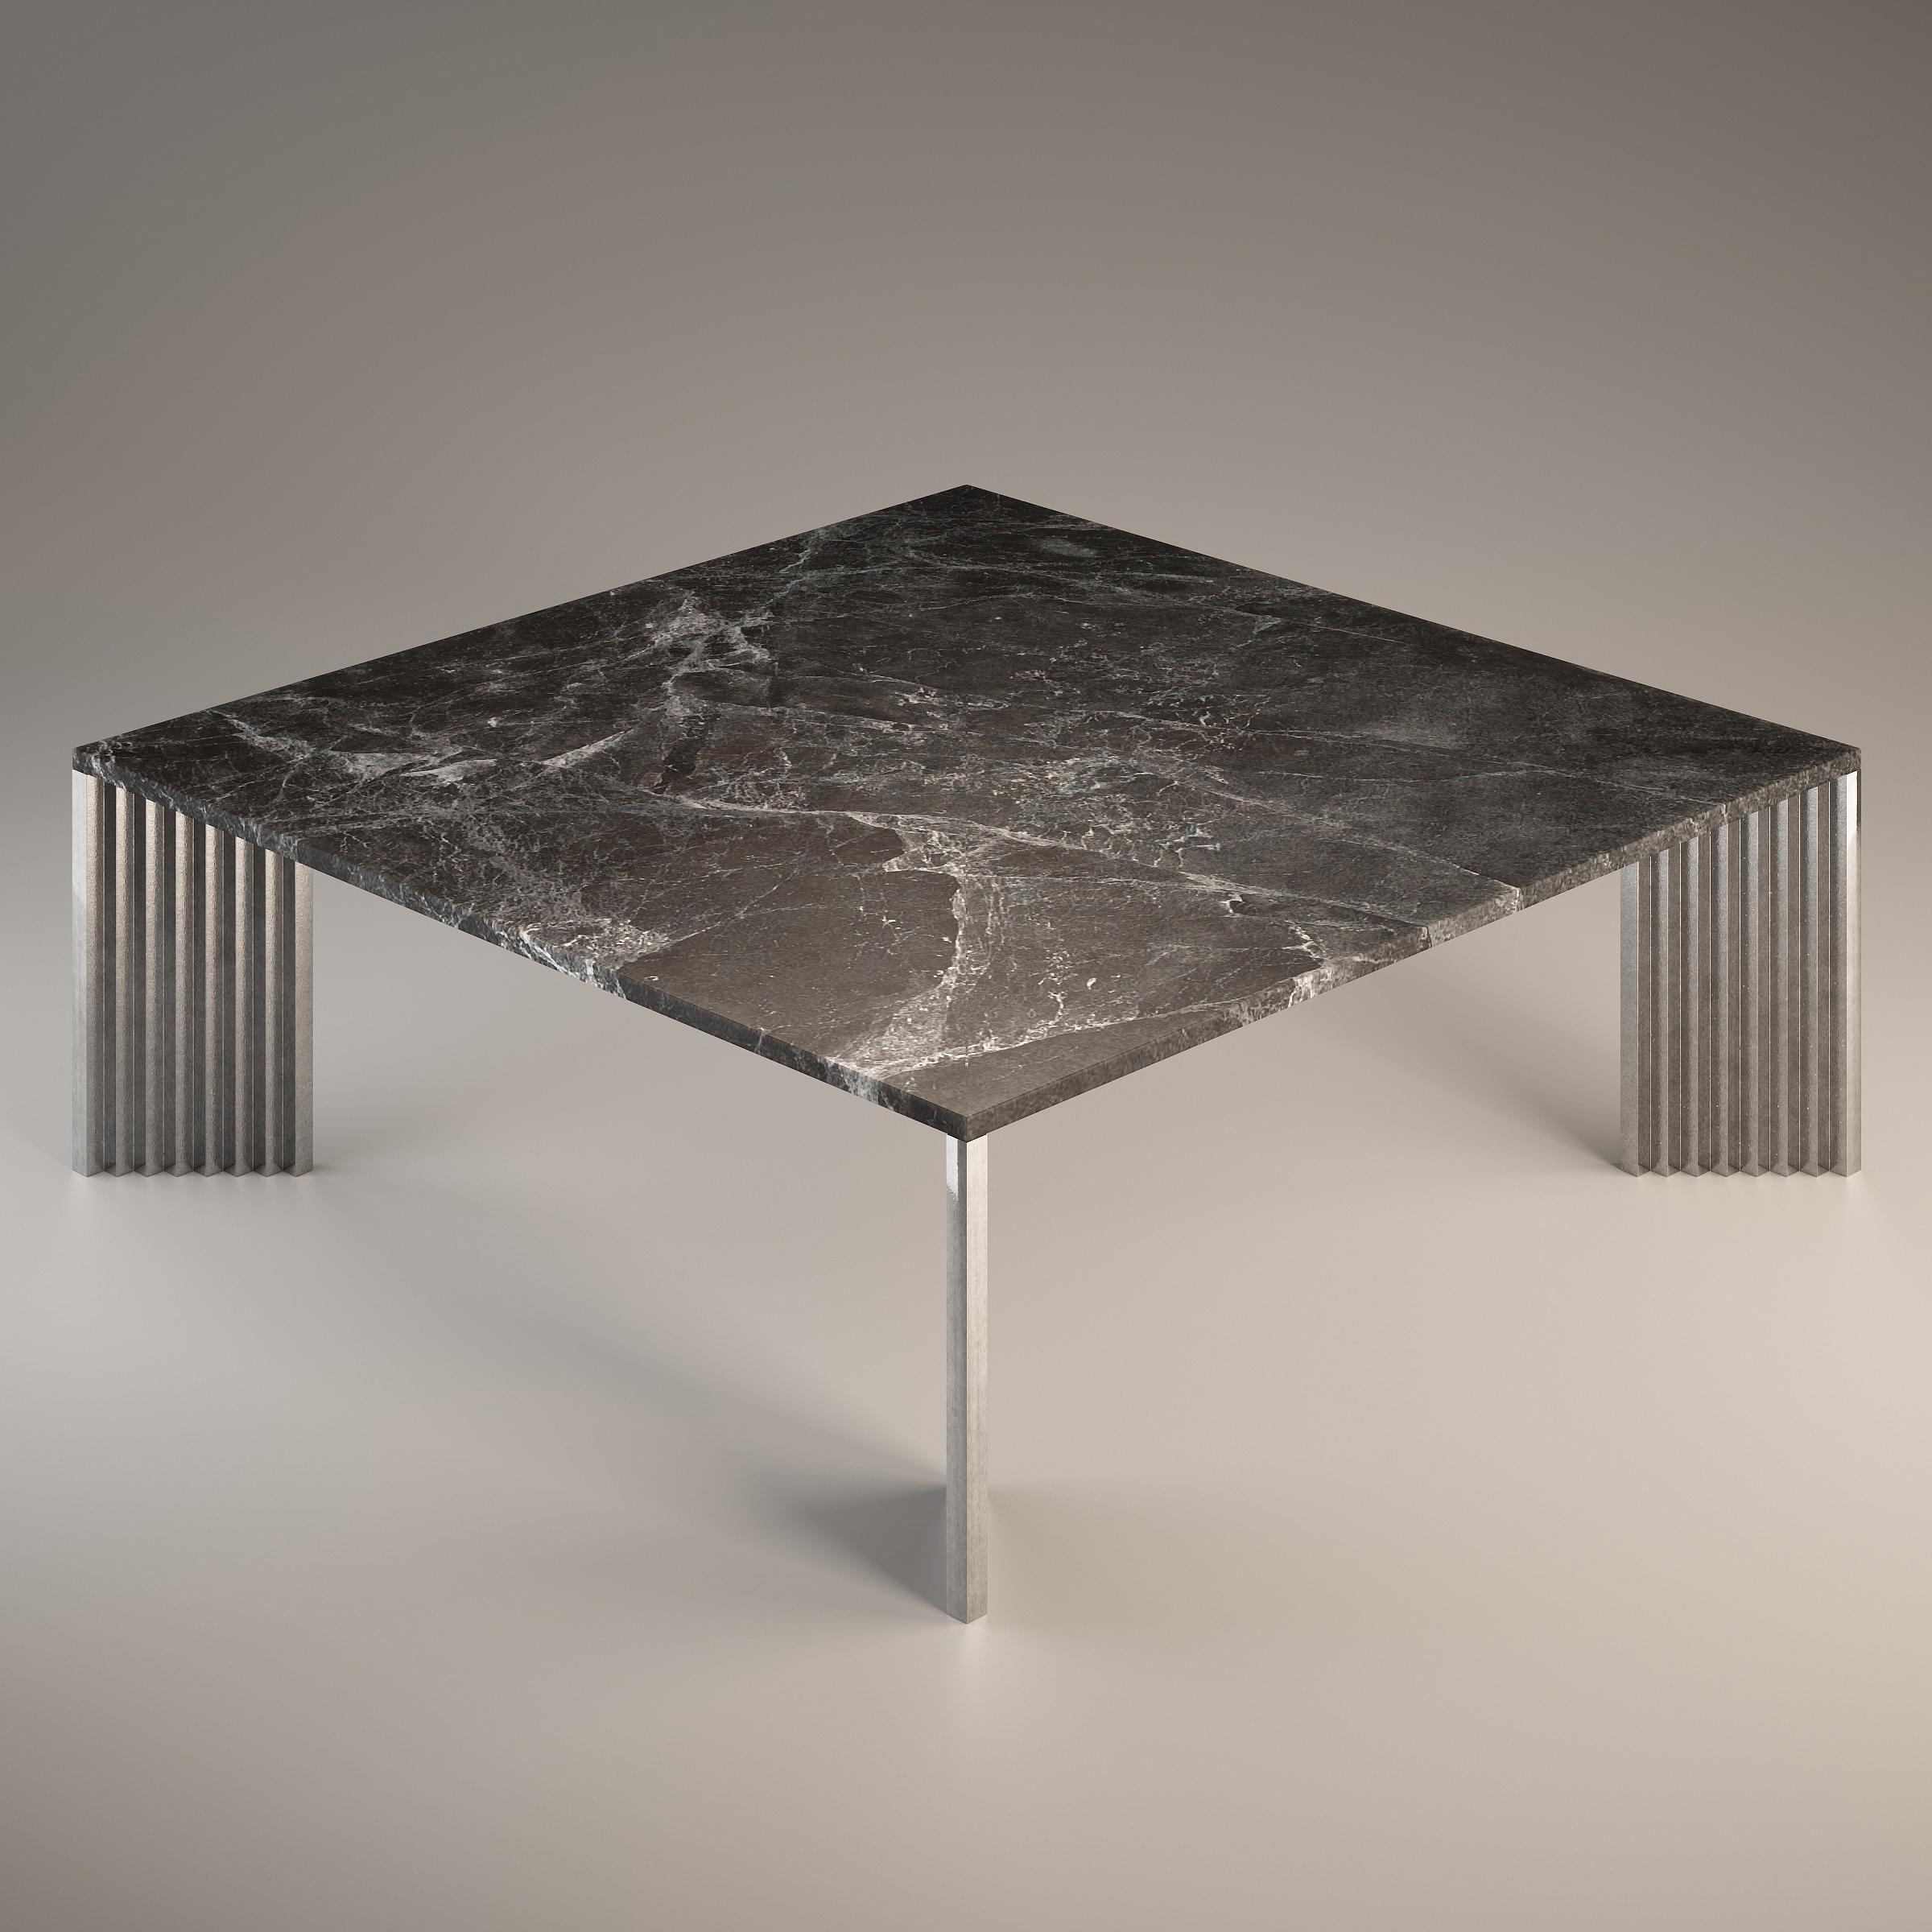 The cast aluminum legs, with their stepped profiles and diagonal position, appear differently from each viewing angle: sometimes slender, then massive, but also polished and at other times rough.

The top is in Emperador Grey, a marble that is